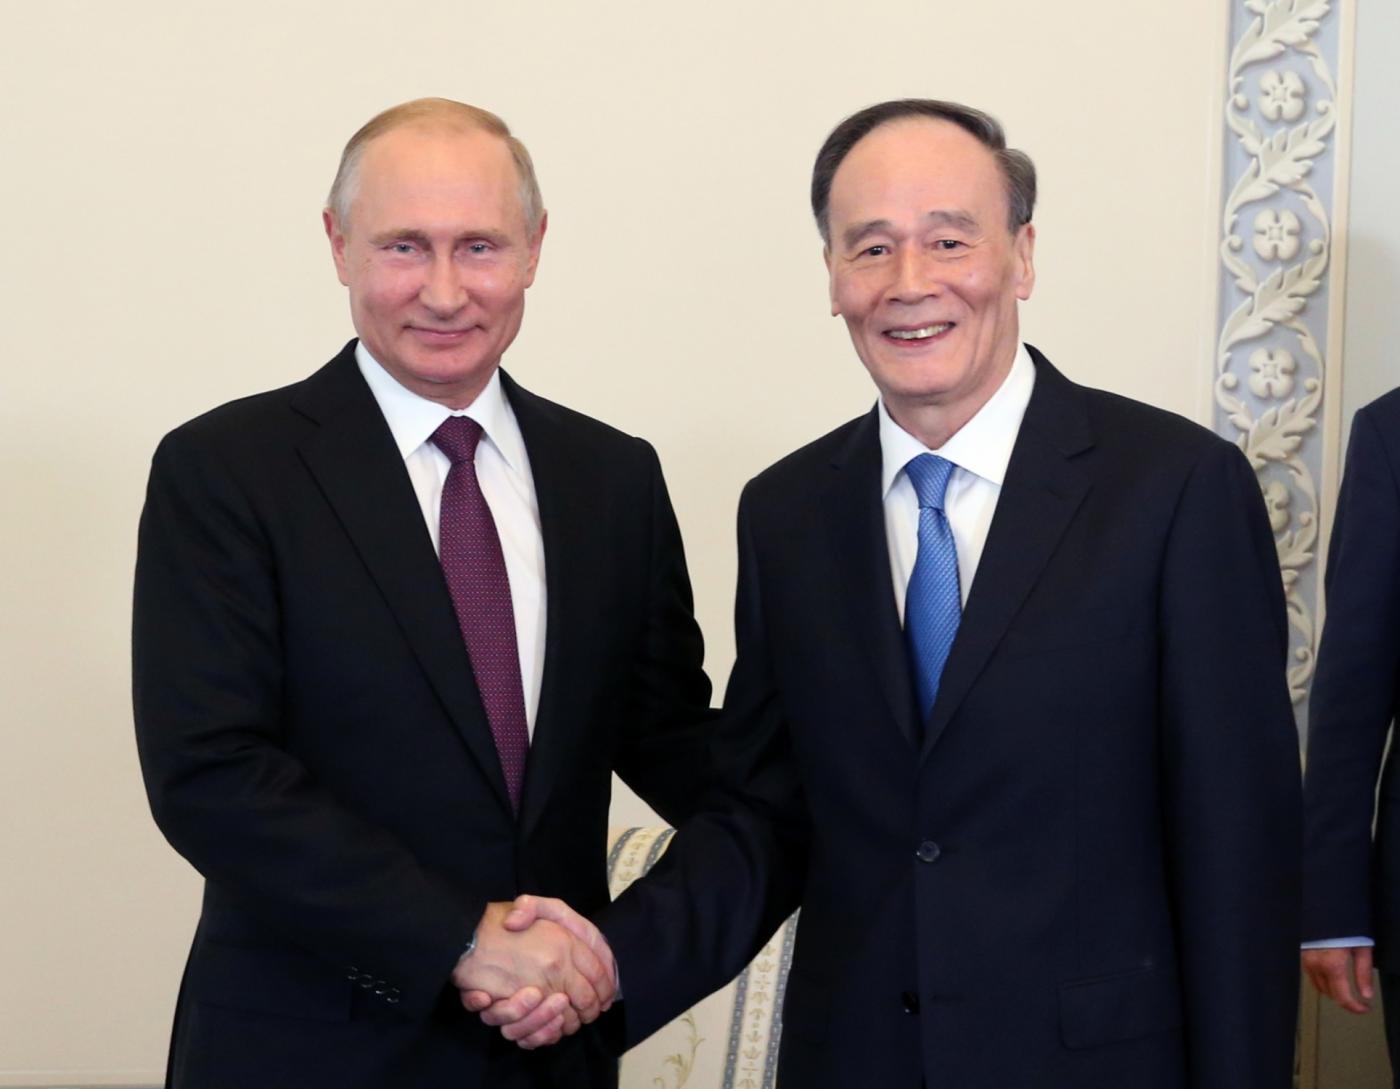 ST. PETERSBURG, May 24, 2018 (Xinhua) -- Chinese Vice President Wang Qishan meets with Russian President Vladimir Putin, in Russia's St. Petersburg, May 24, 2018. (Xinhua/Yao Dawei/IANS) by .